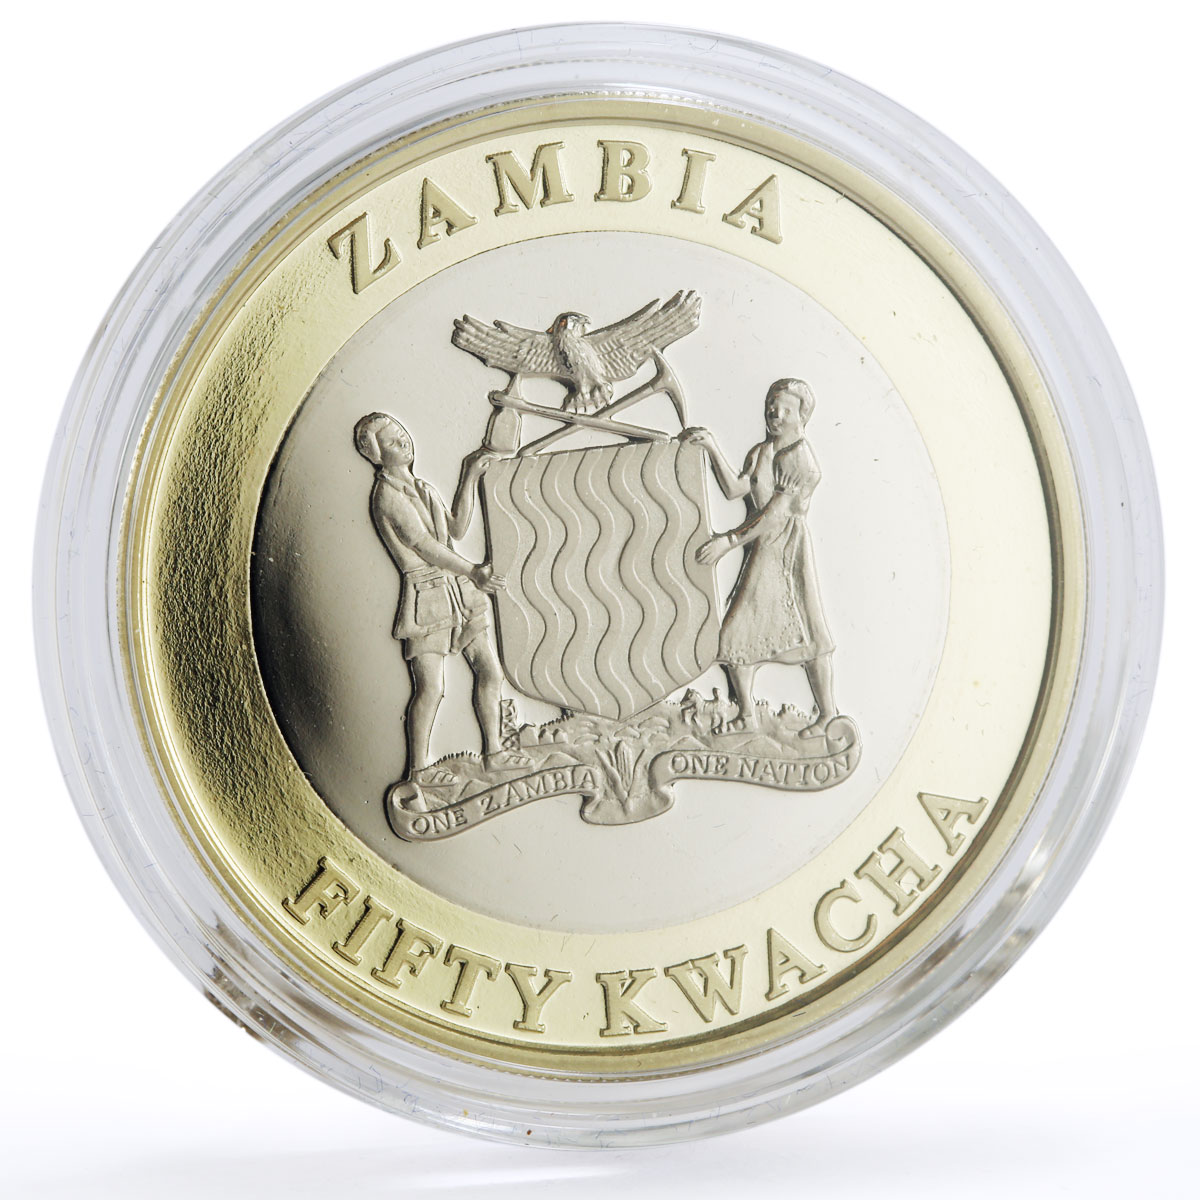 Zambia 50 kwacha 50th Anniversary of National Central Bank proof CuNi coin 2014